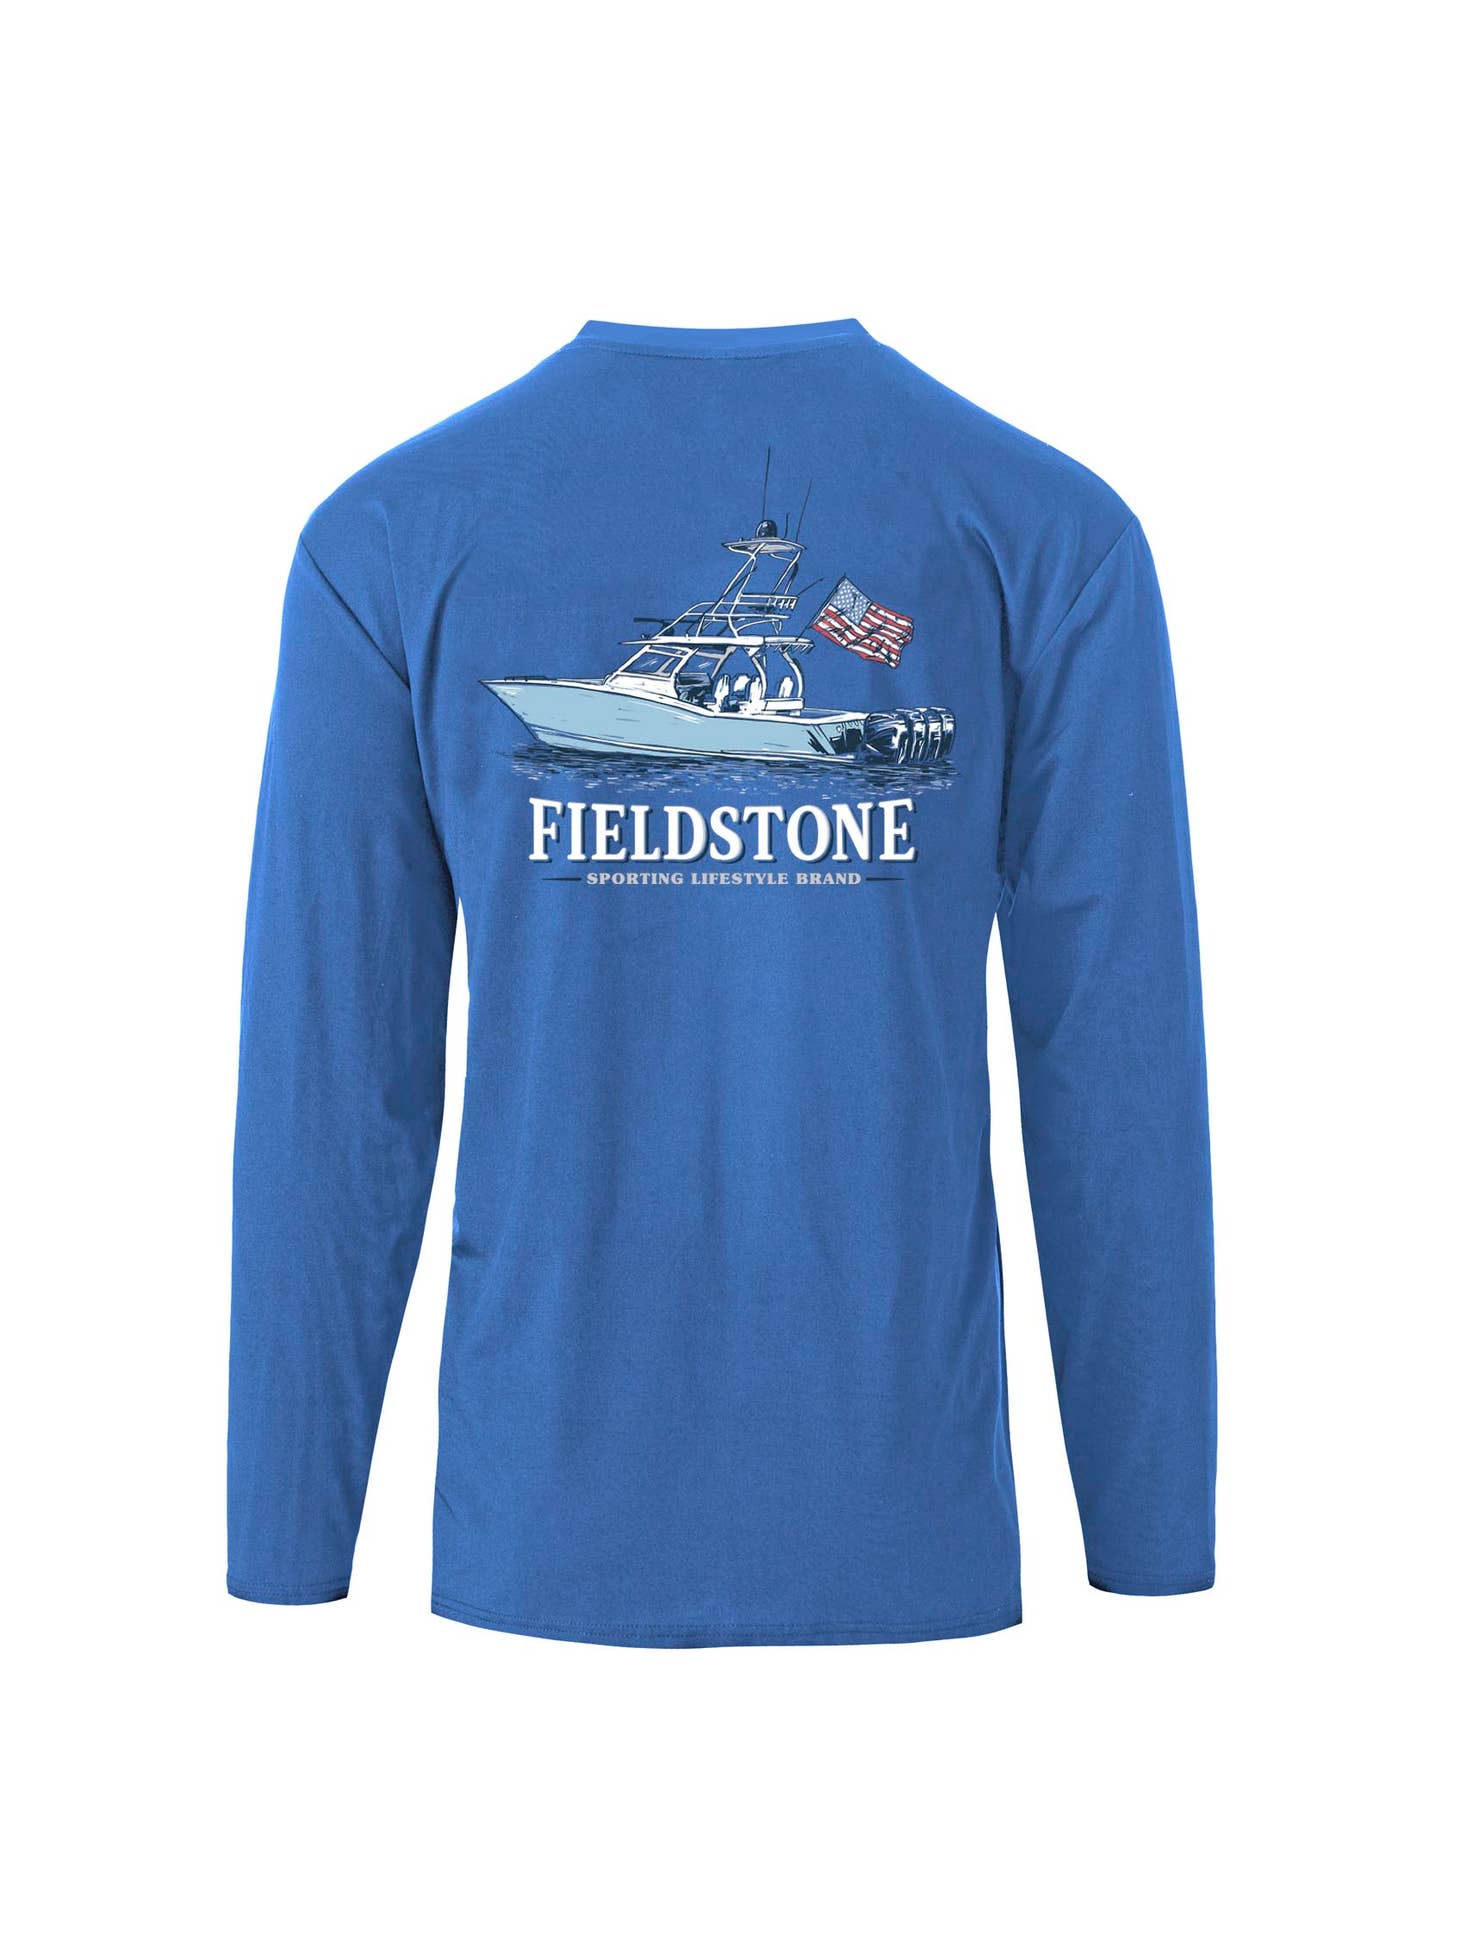 A Fieldstone Outdoor Provisions Co. L/S Performance Saltwater shirt with a boat on it.